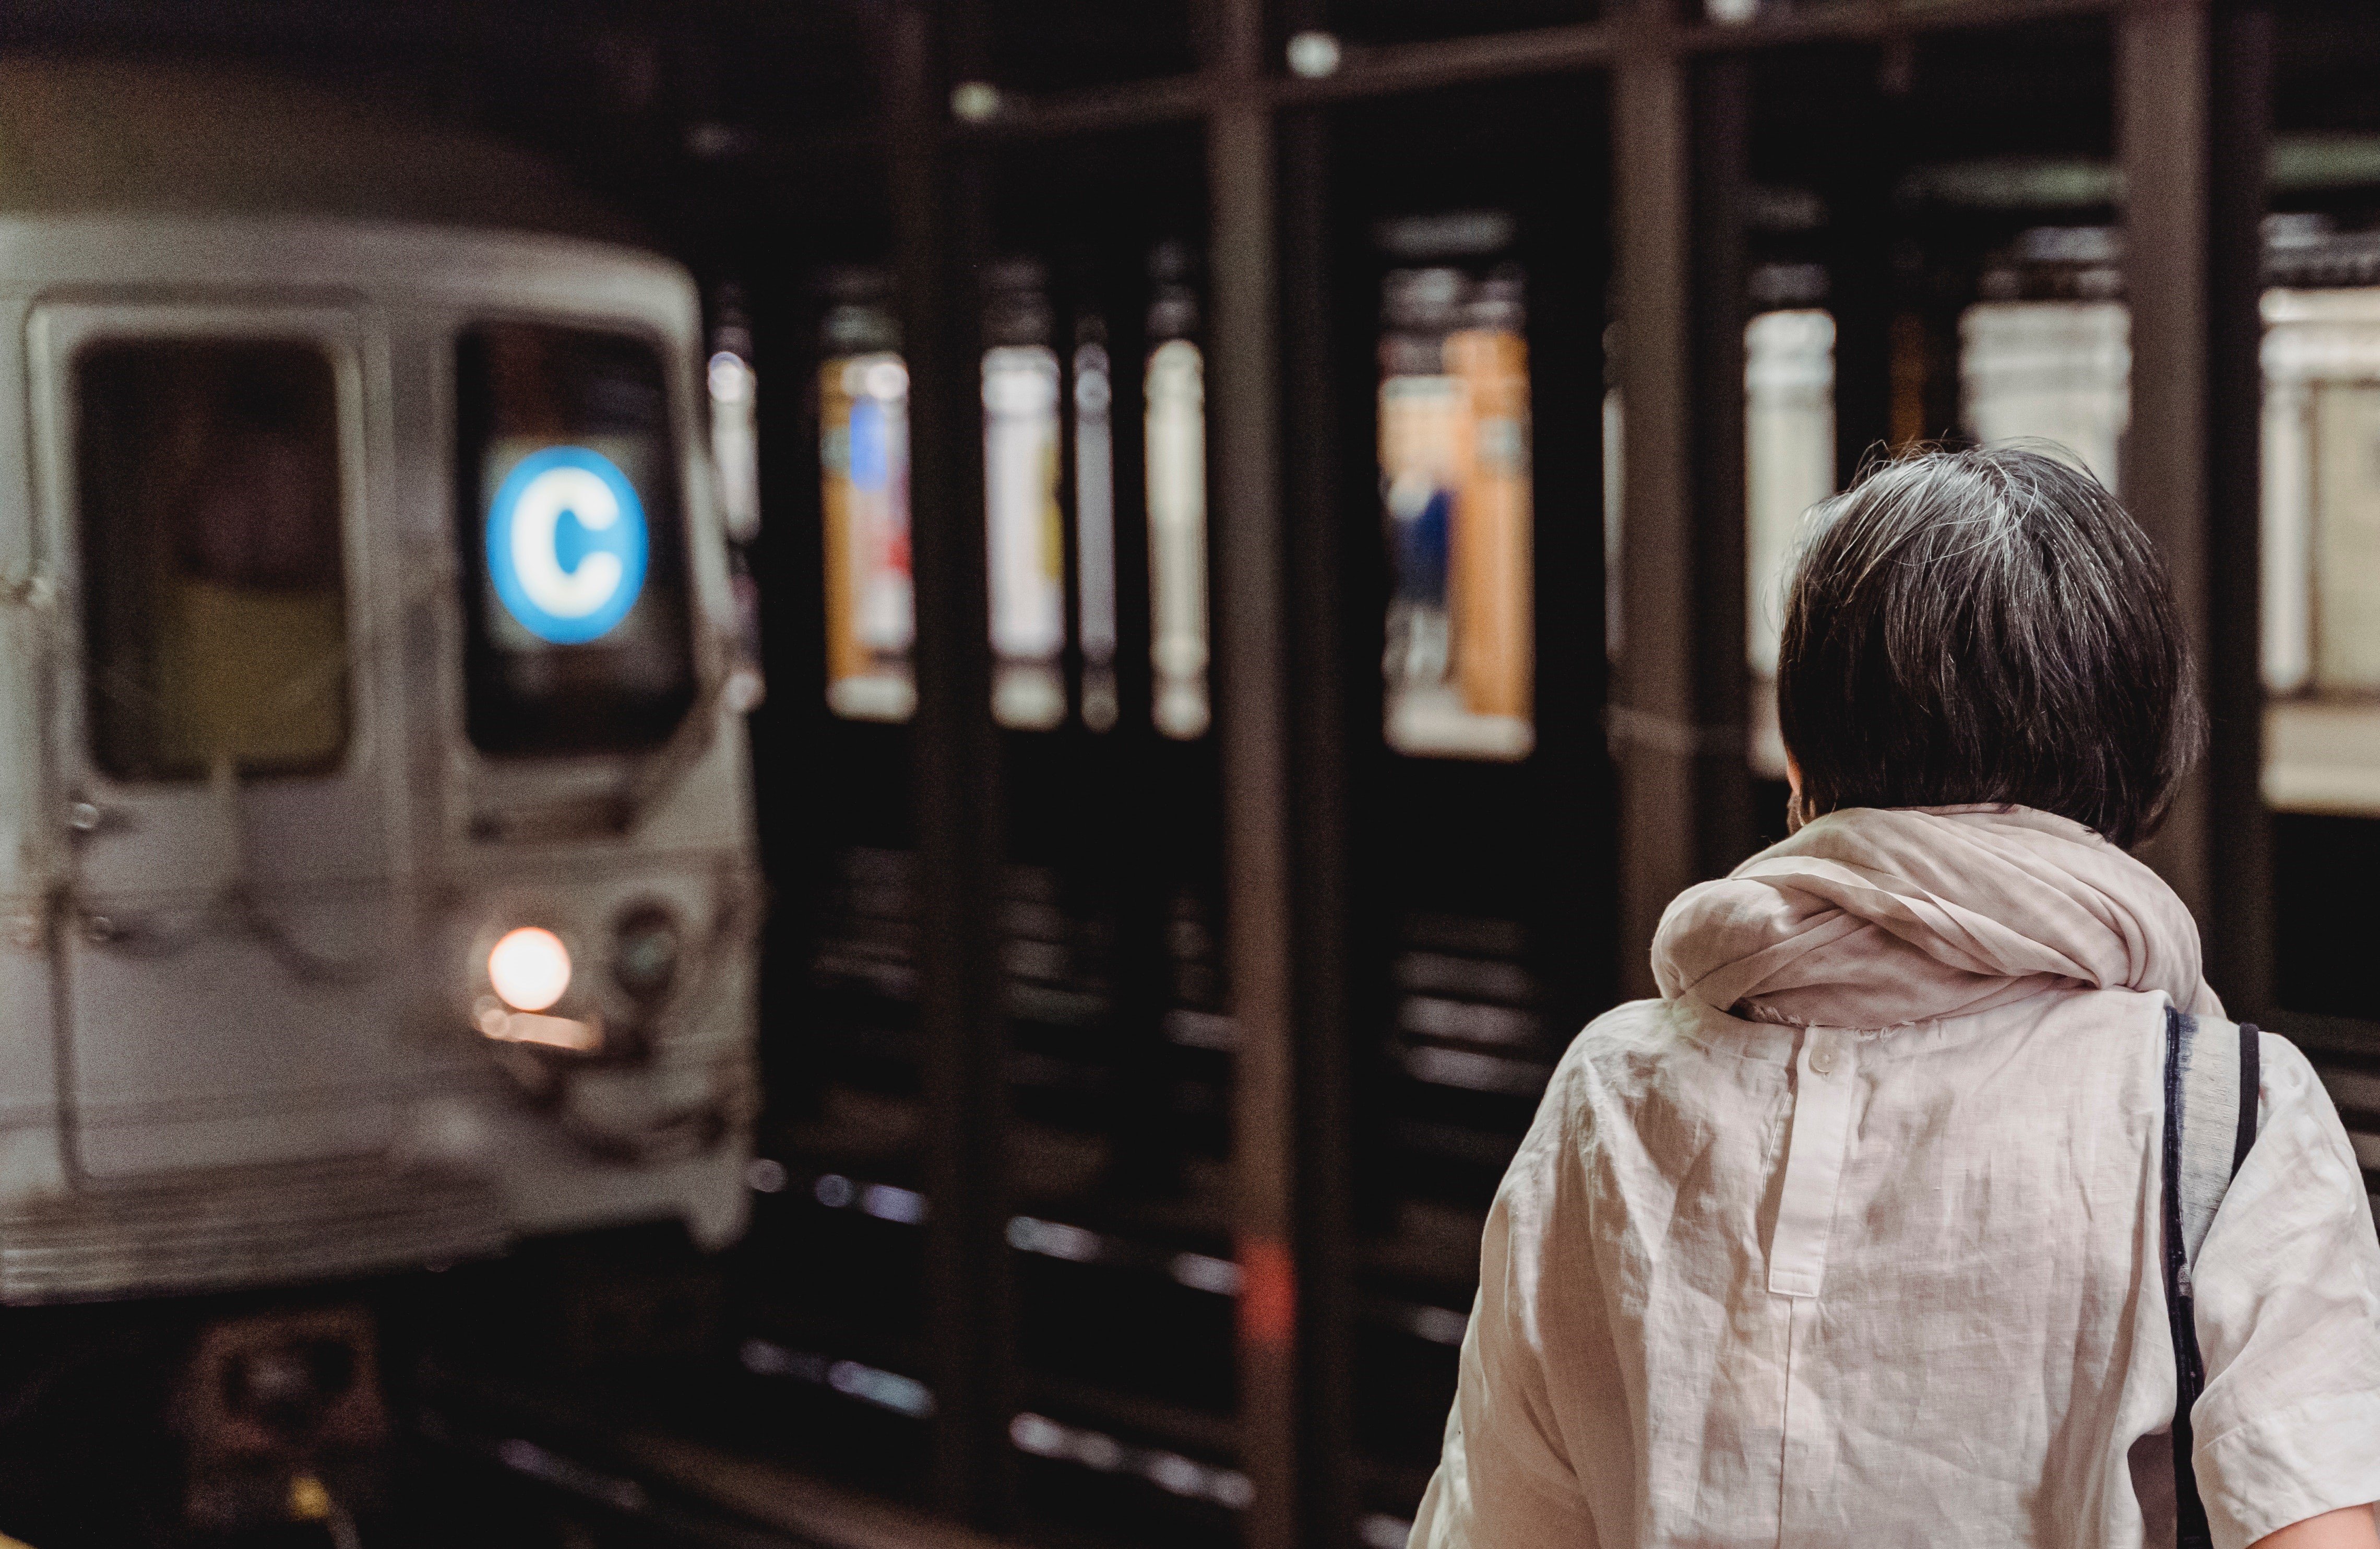 OP ran into an old lady at the station | Photo: Pexels